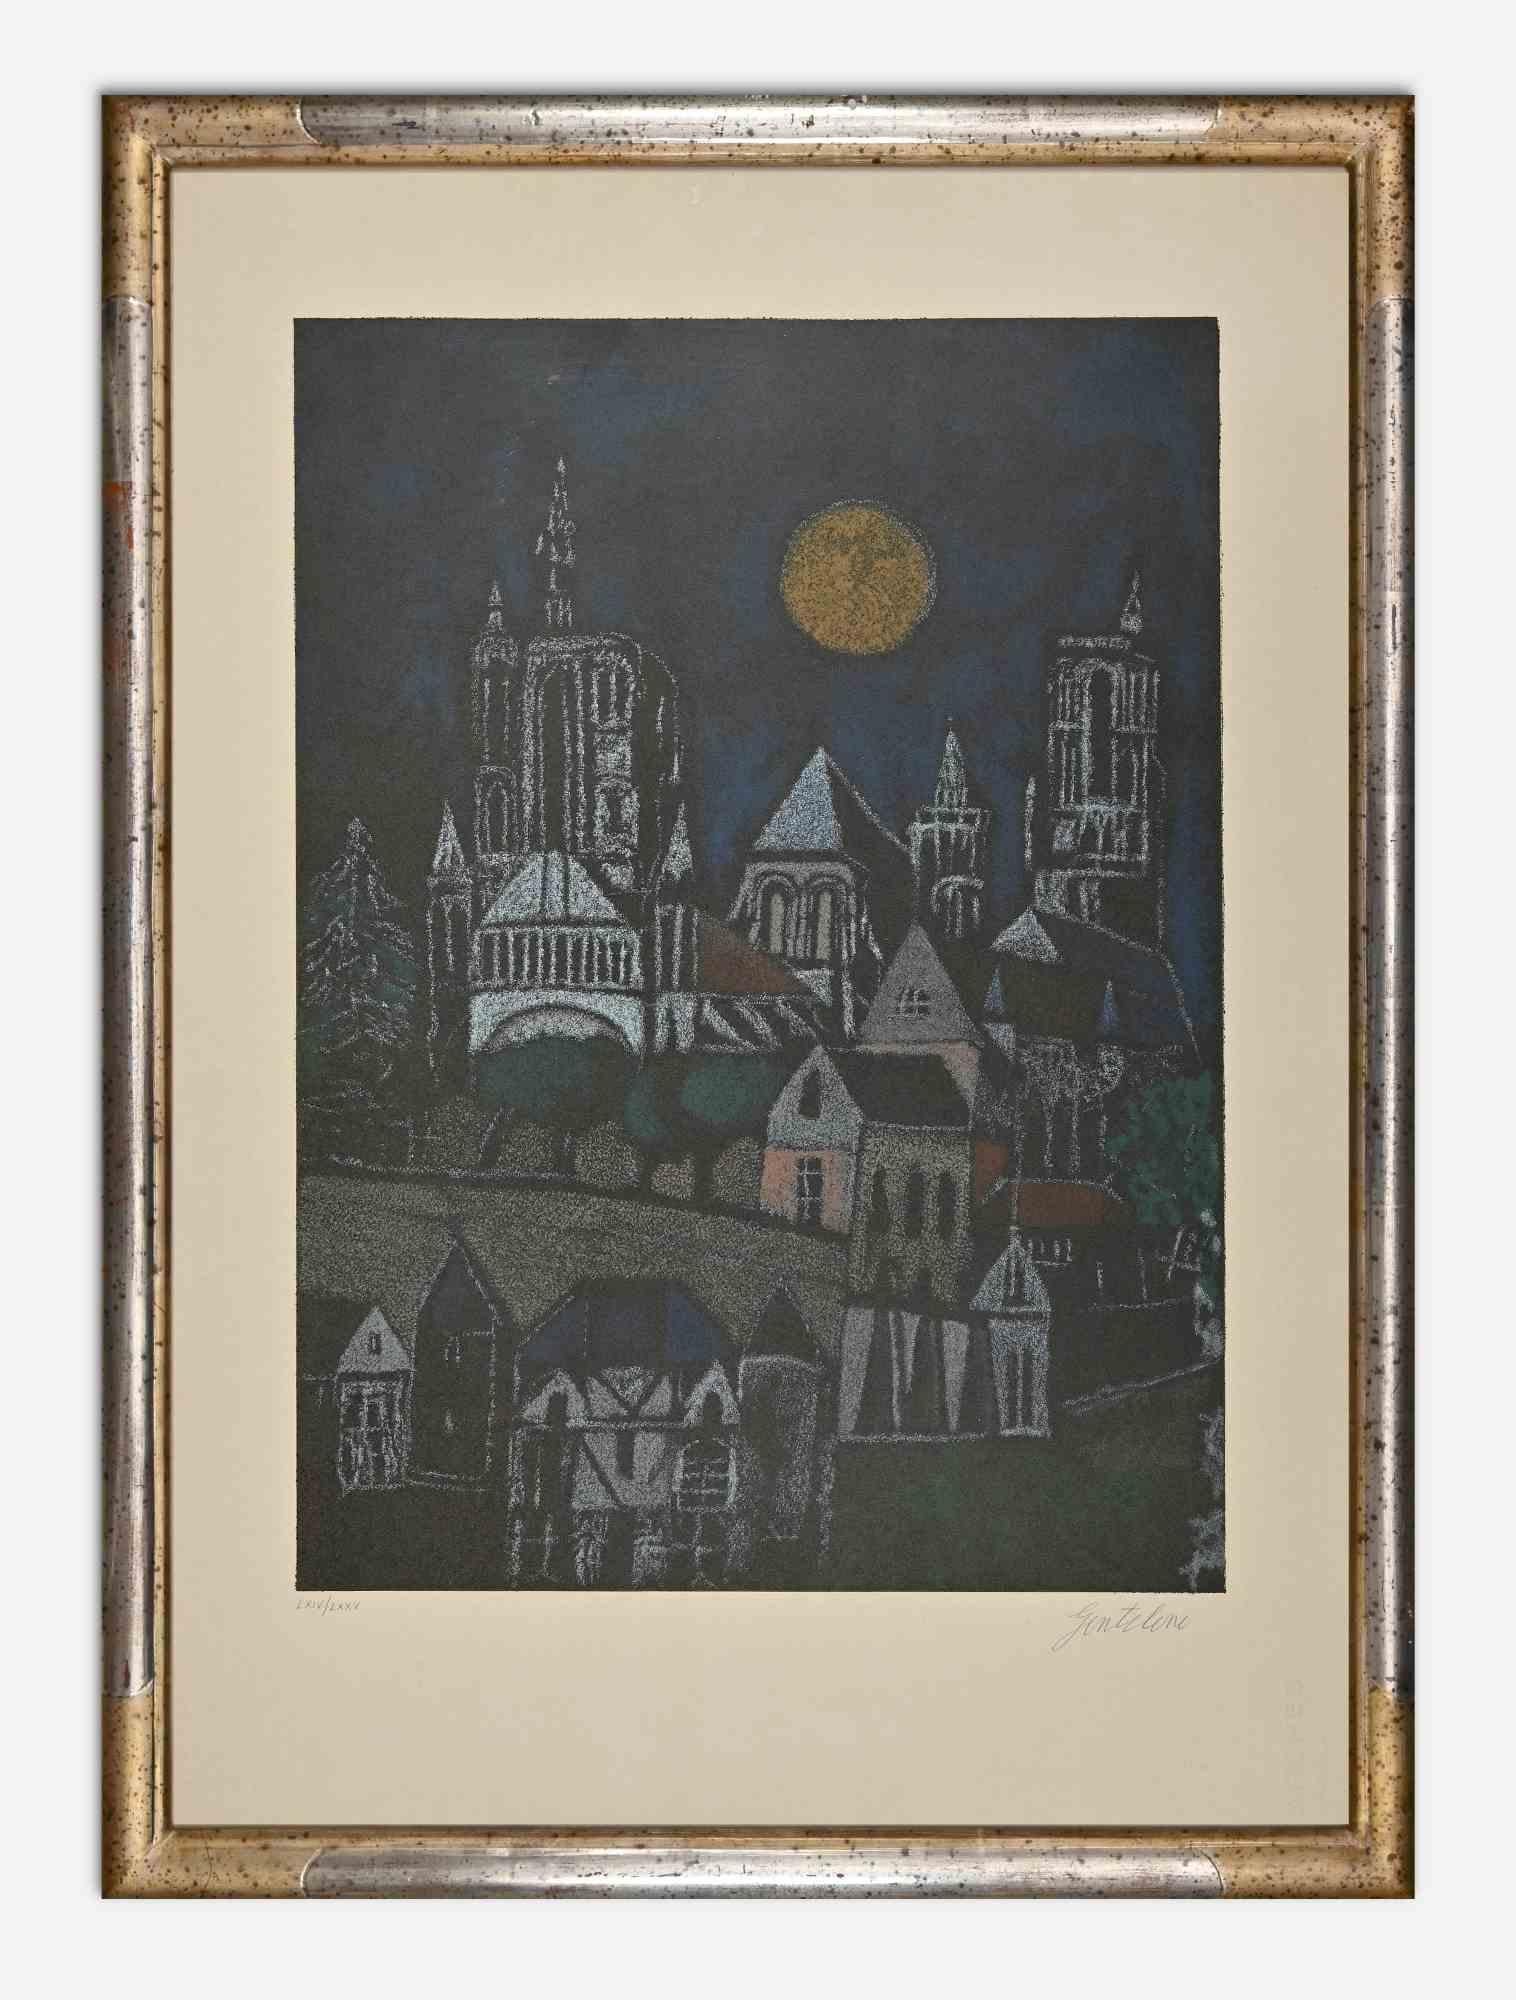 Nocturnal View is an original modern artwork realized in 1970s by Franco Gentilini.

Mixed colored etching.

Hand signed and numbered on the lower margin. Edition of LXIV/LXXV.

Includes frame: 82 x 60 cm

Good conditions except for some yellowing